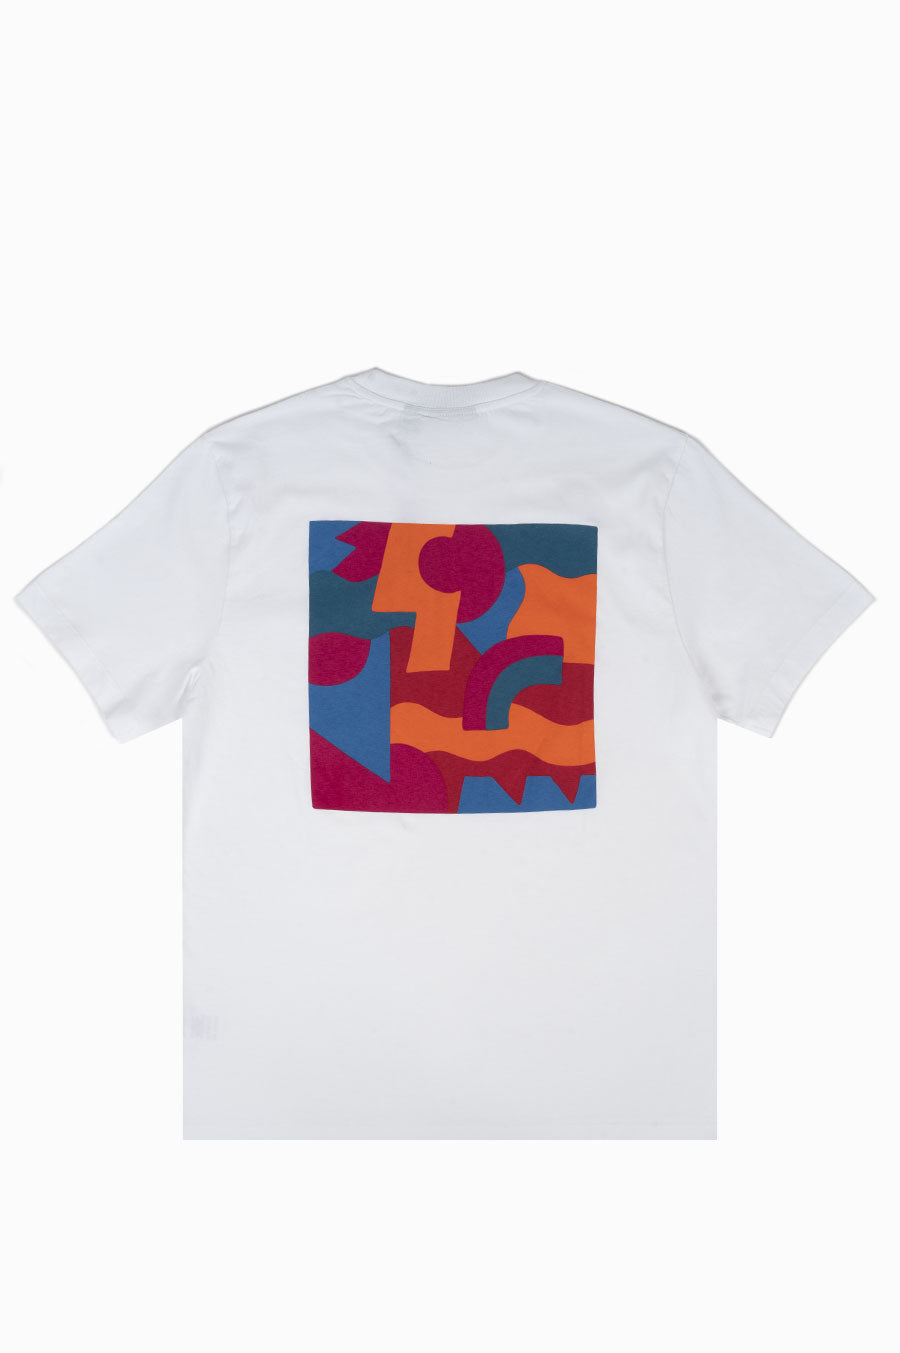 PARRA ABSTRACT SHAPES T-SHIRT WHITE